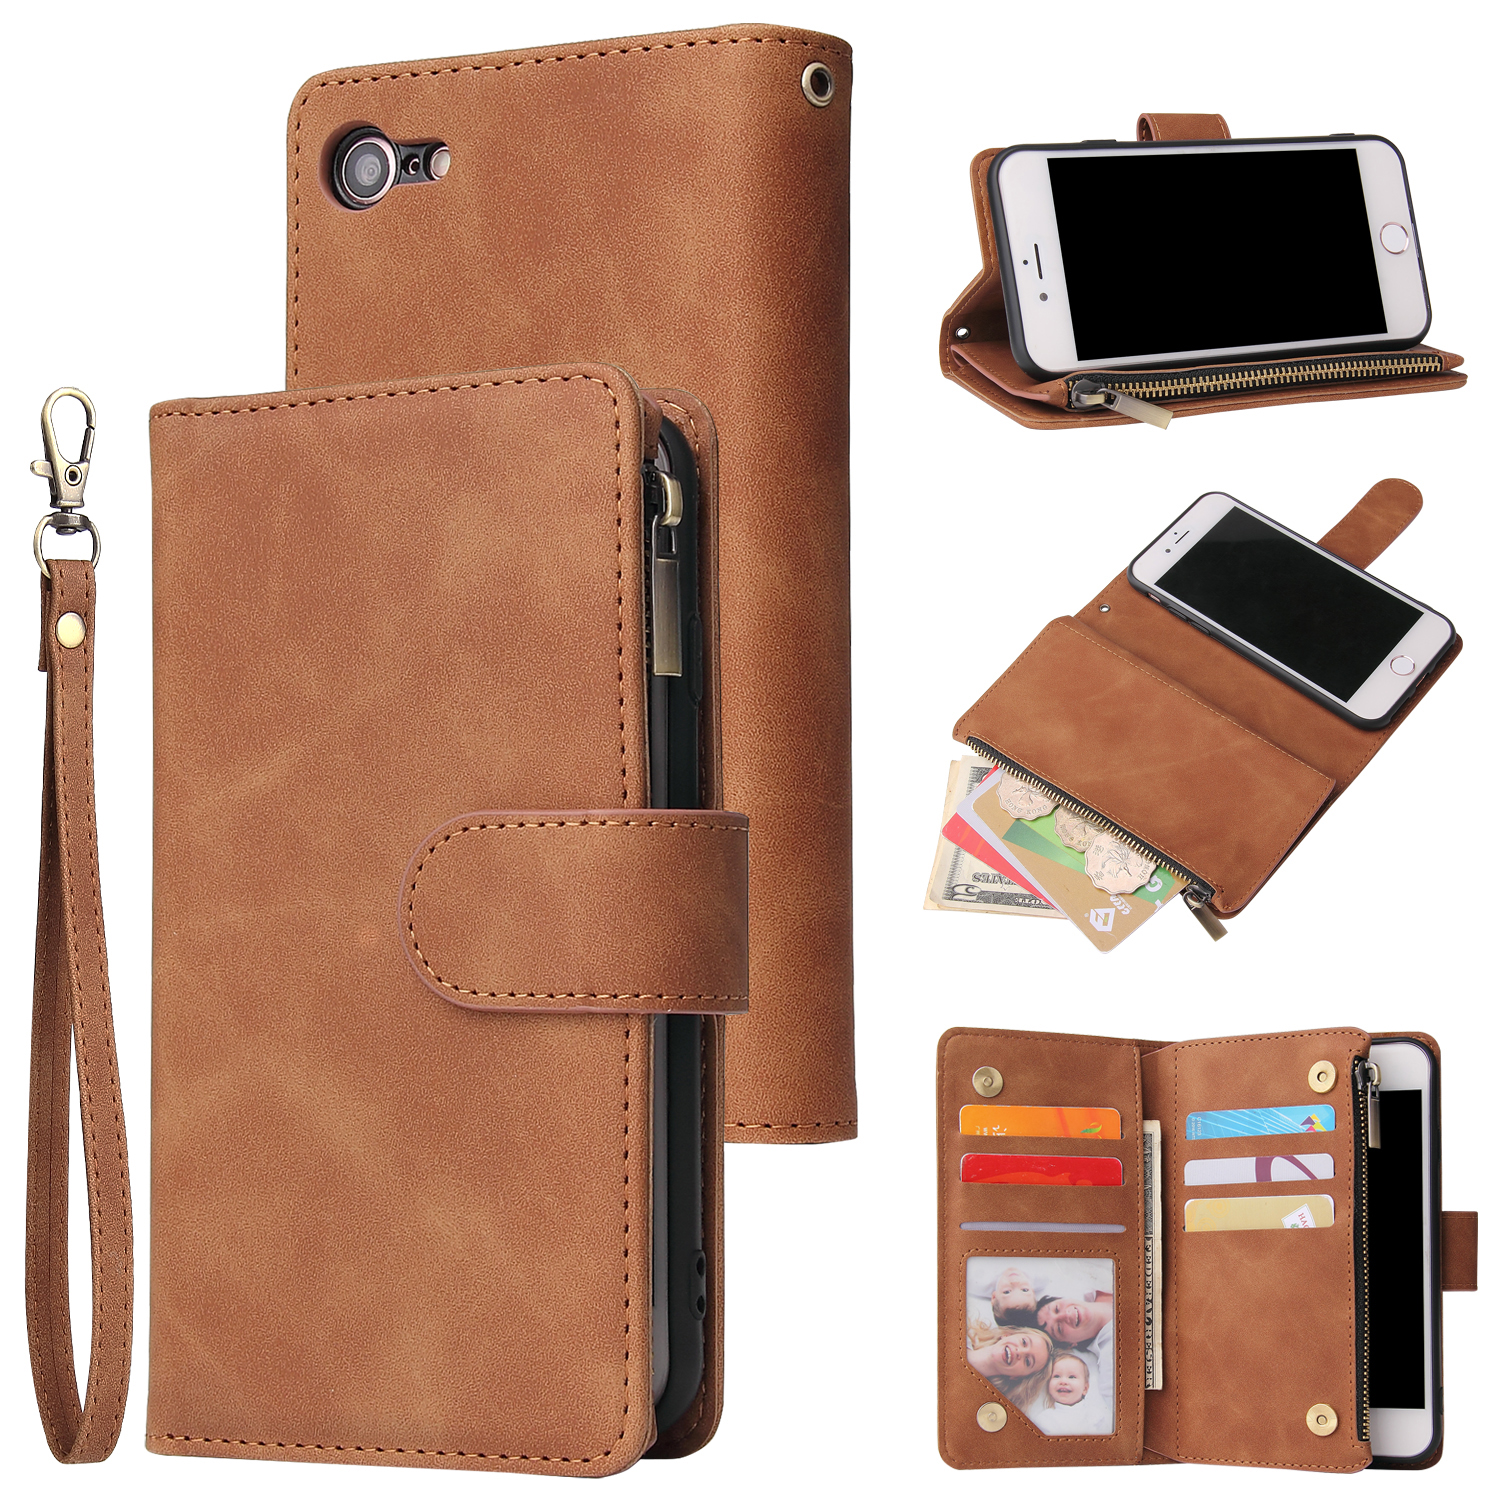 For iPhone 6 / 6S iPhone 6 plus / 6S plus iPhone 7 / 8 iPhone 7 plus / 8 plus Smart Phone Cover Coin Pocket with Cards Bracket Zipper Phone PU Leather Case Phone Cover  iPhone 7 / 8